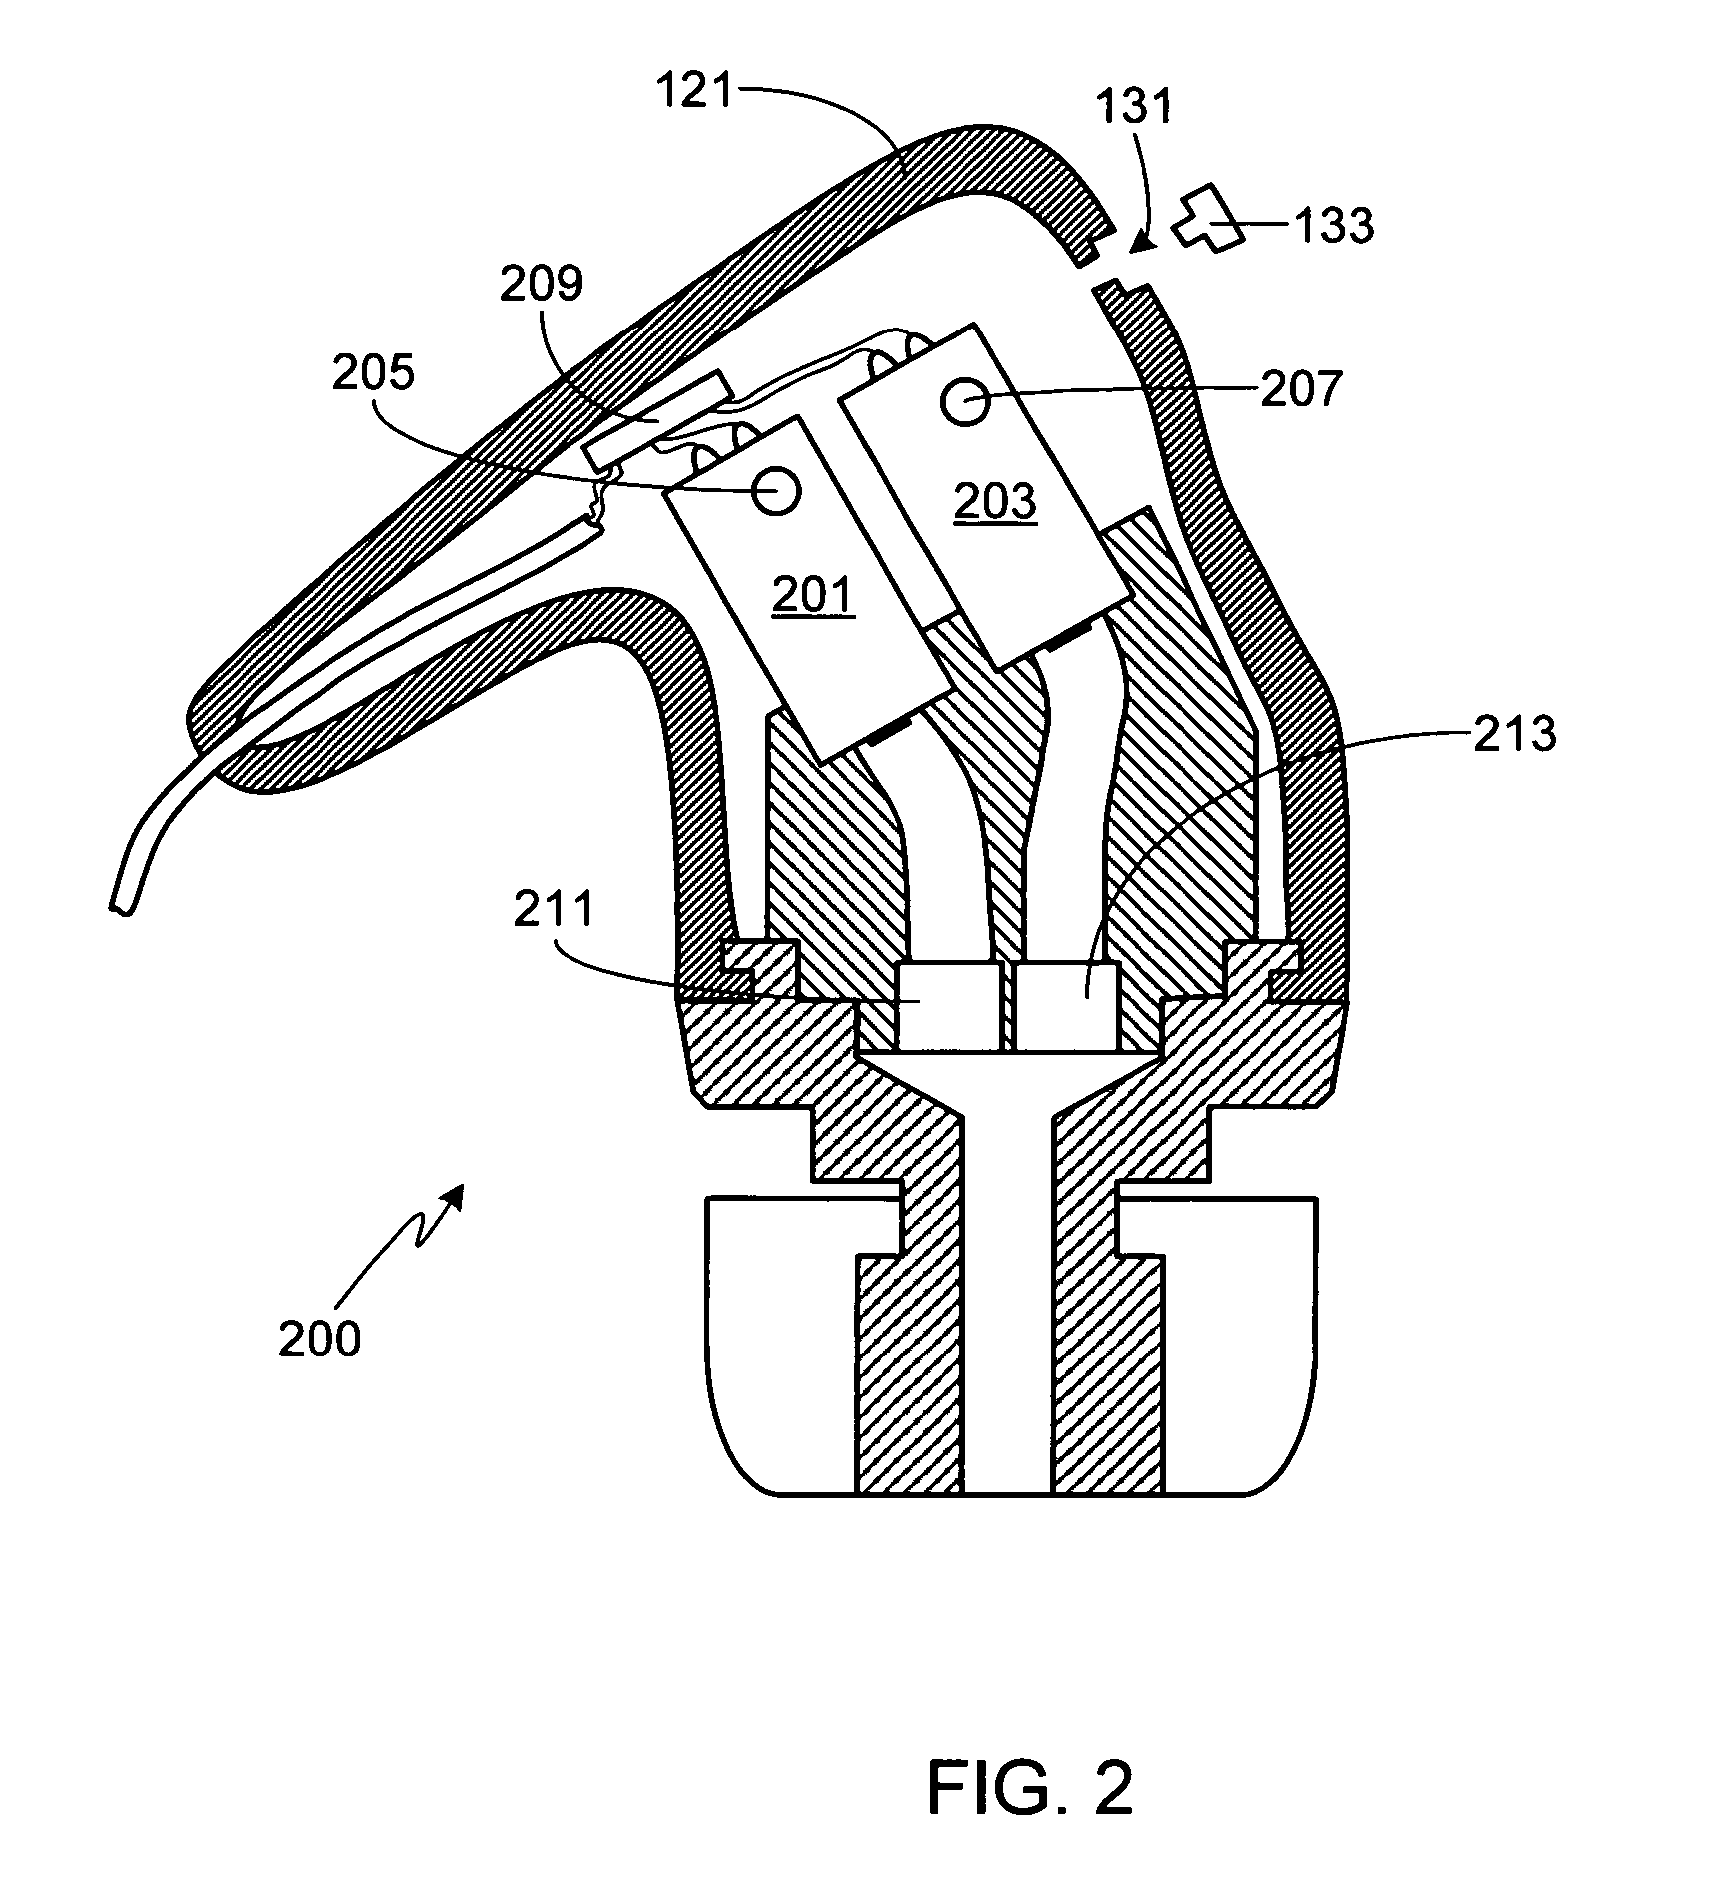 High-fidelity earpiece with adjustable frequency response